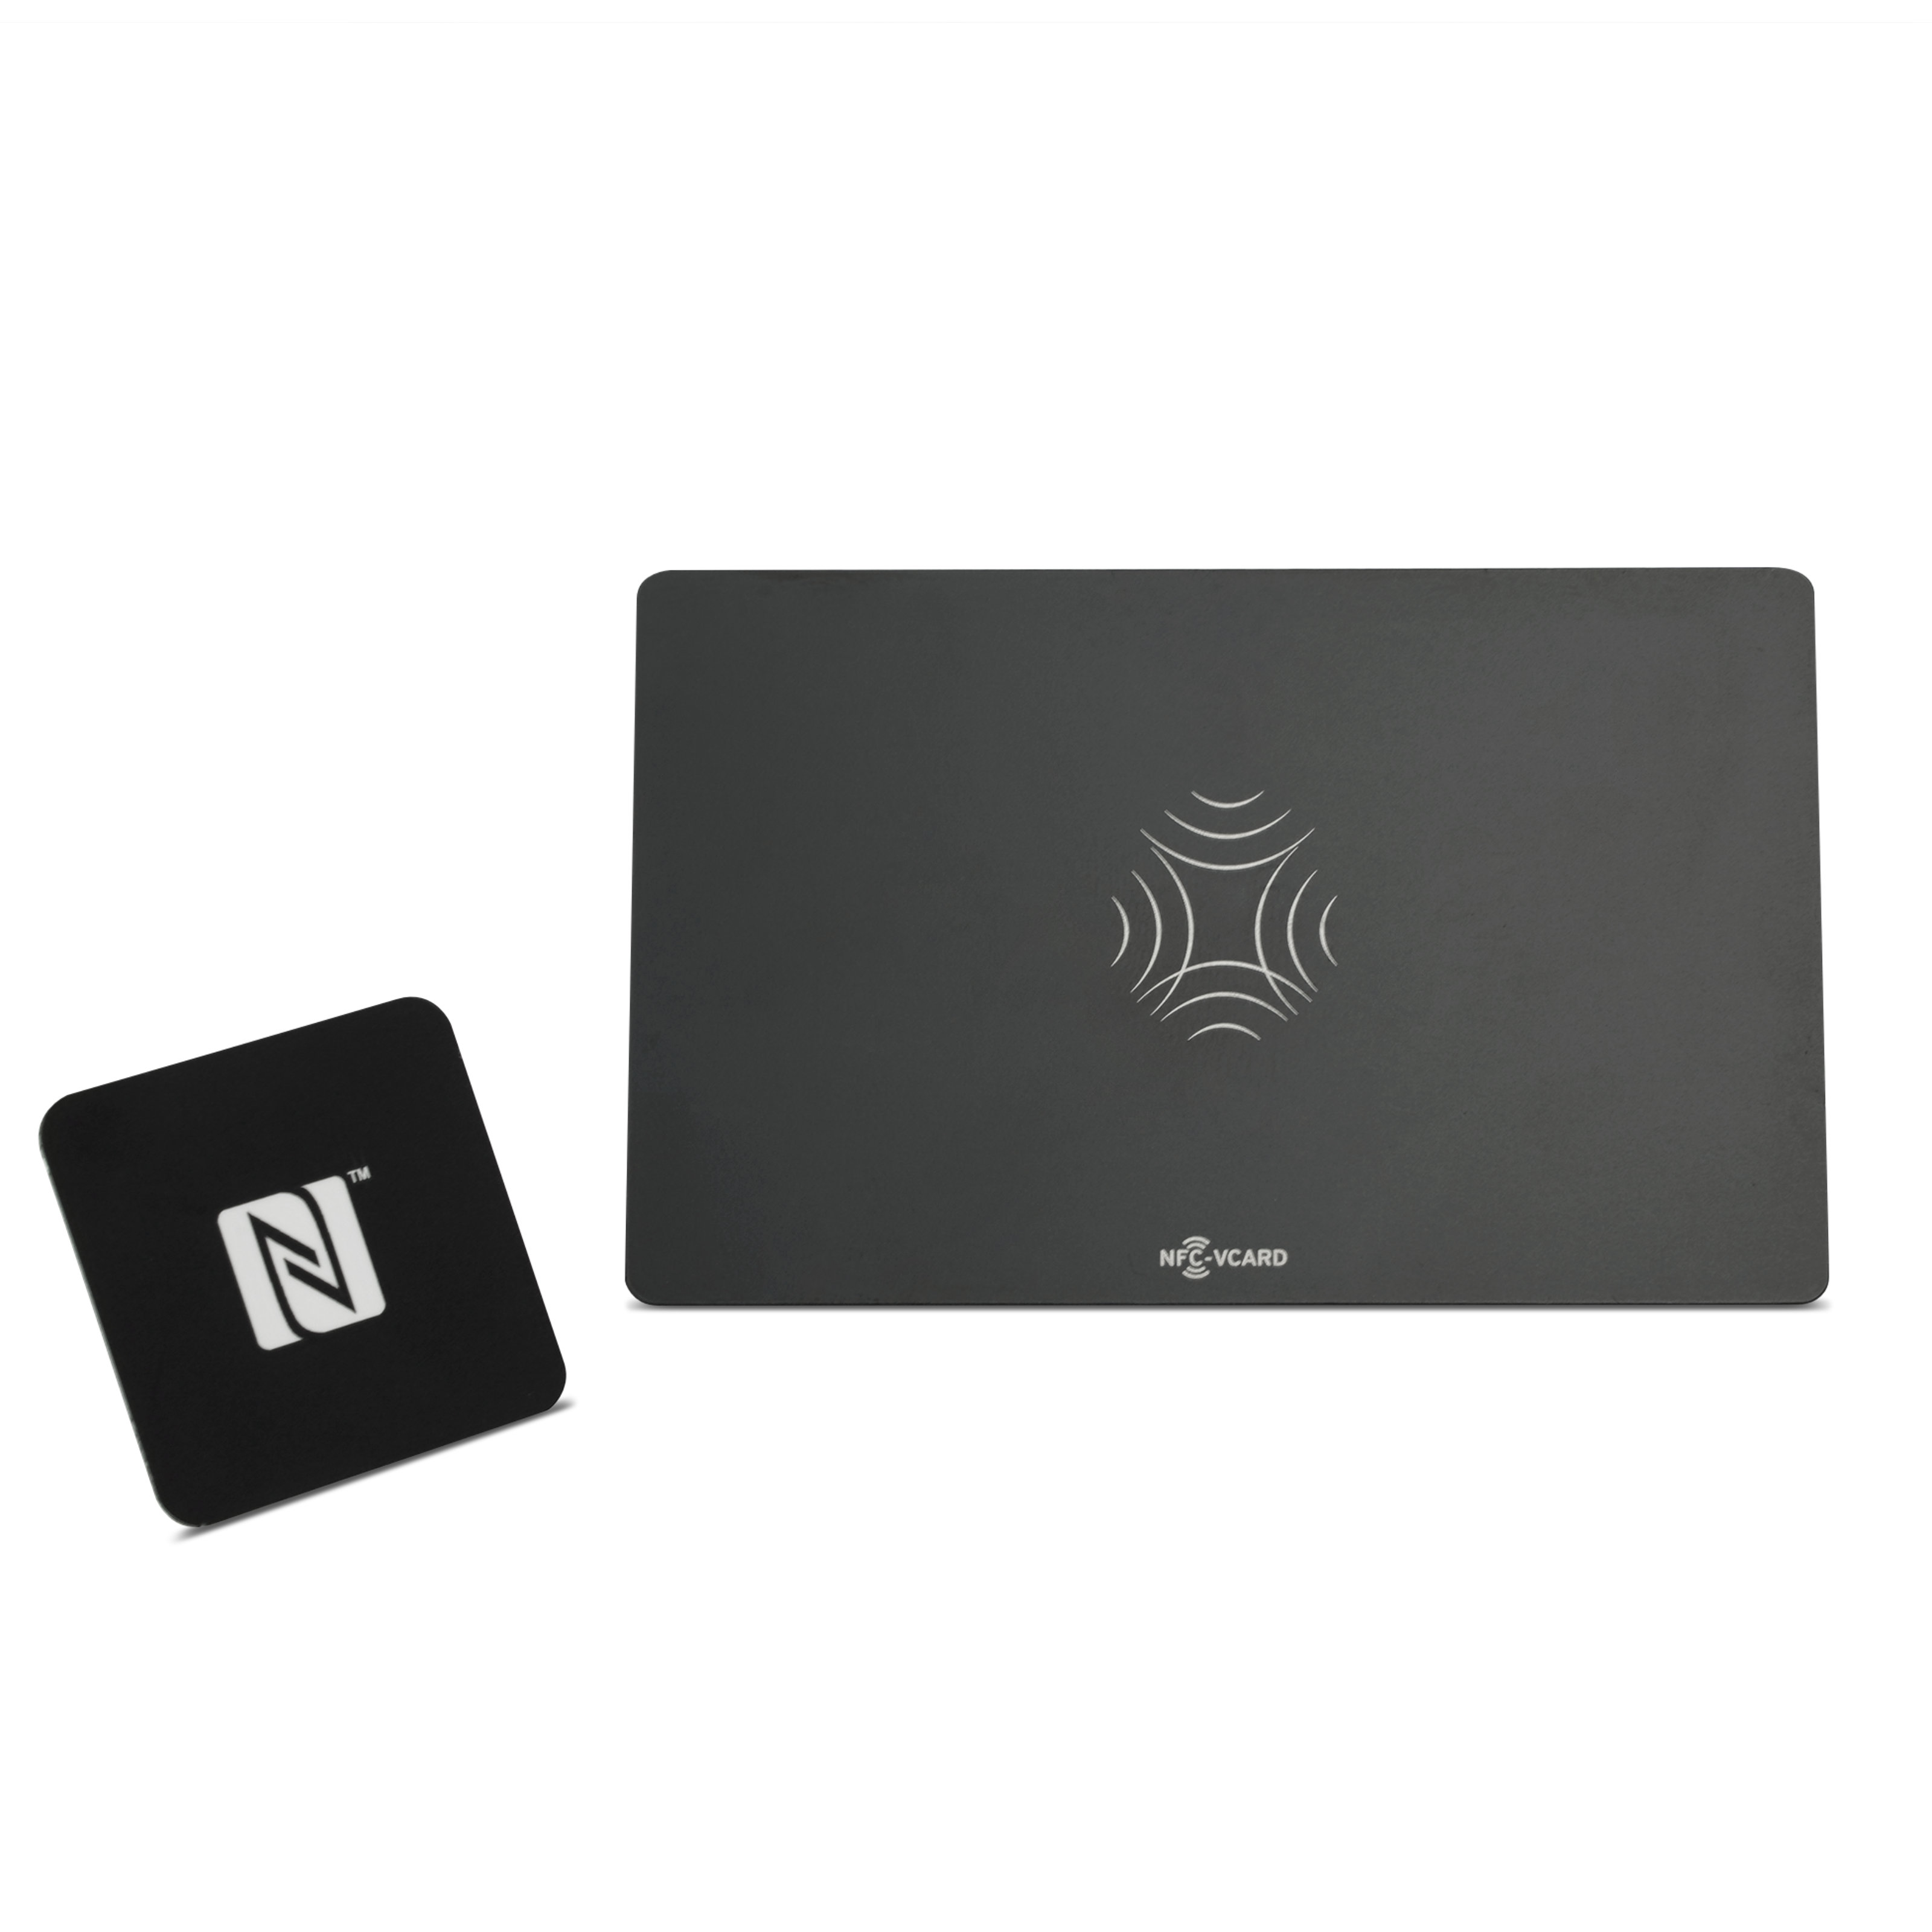 NFC-vCard - Digital business card - incl. NFC-vCard access - metal - 85 x 54 mm - black with engraving